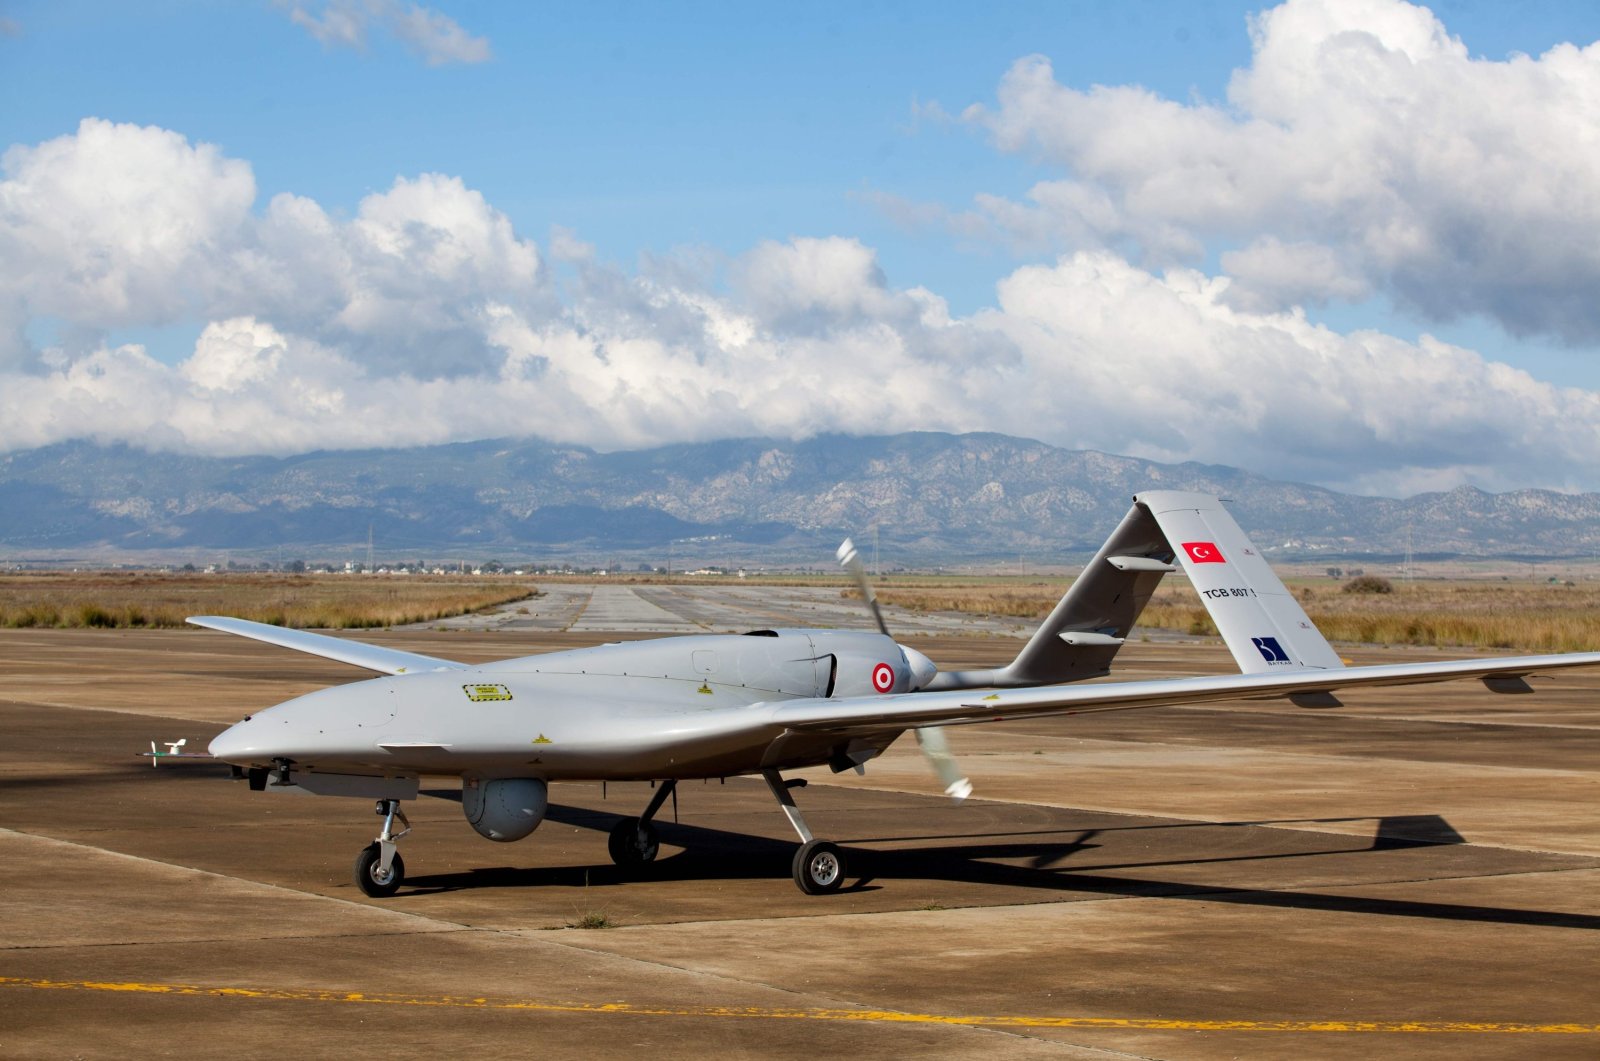 A Bayraktar TB2 drone is pictured at the Geçitkale military air base near Gazimağusa (Famagusta) in the Turkish Republic of Northern Cyprus (TRNC), Dec. 16, 2019. (AFP File Photo)